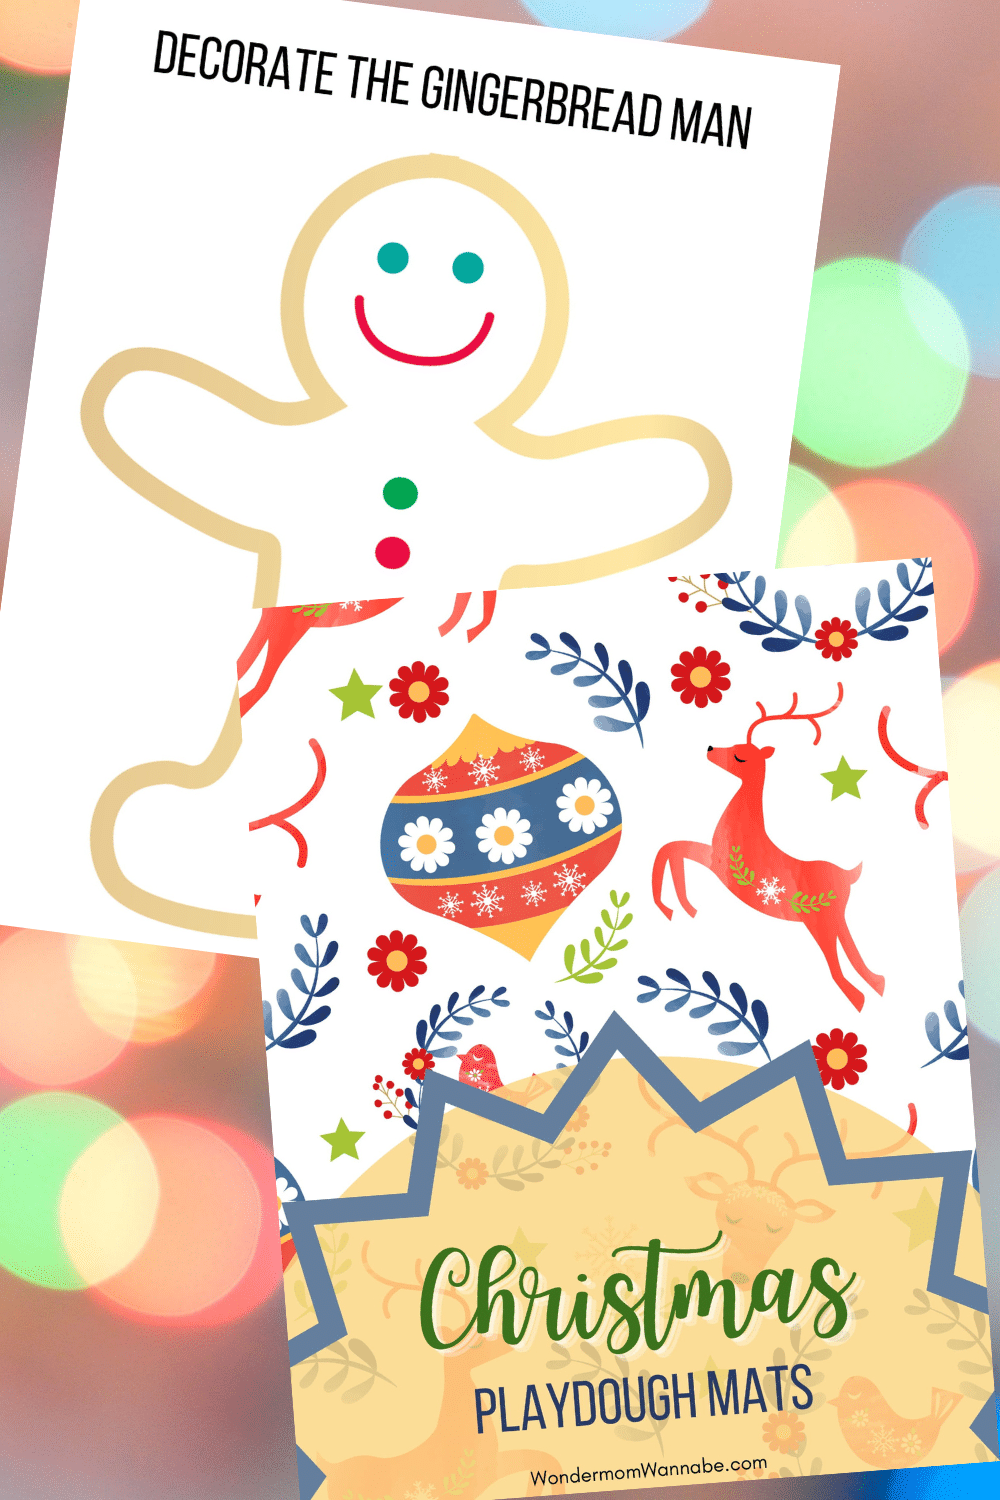 2 printables with colored lights in the background. 1 printable is titled decorate the gingerbread man. The other printable is the cover page titled Christmas Playdough Mats